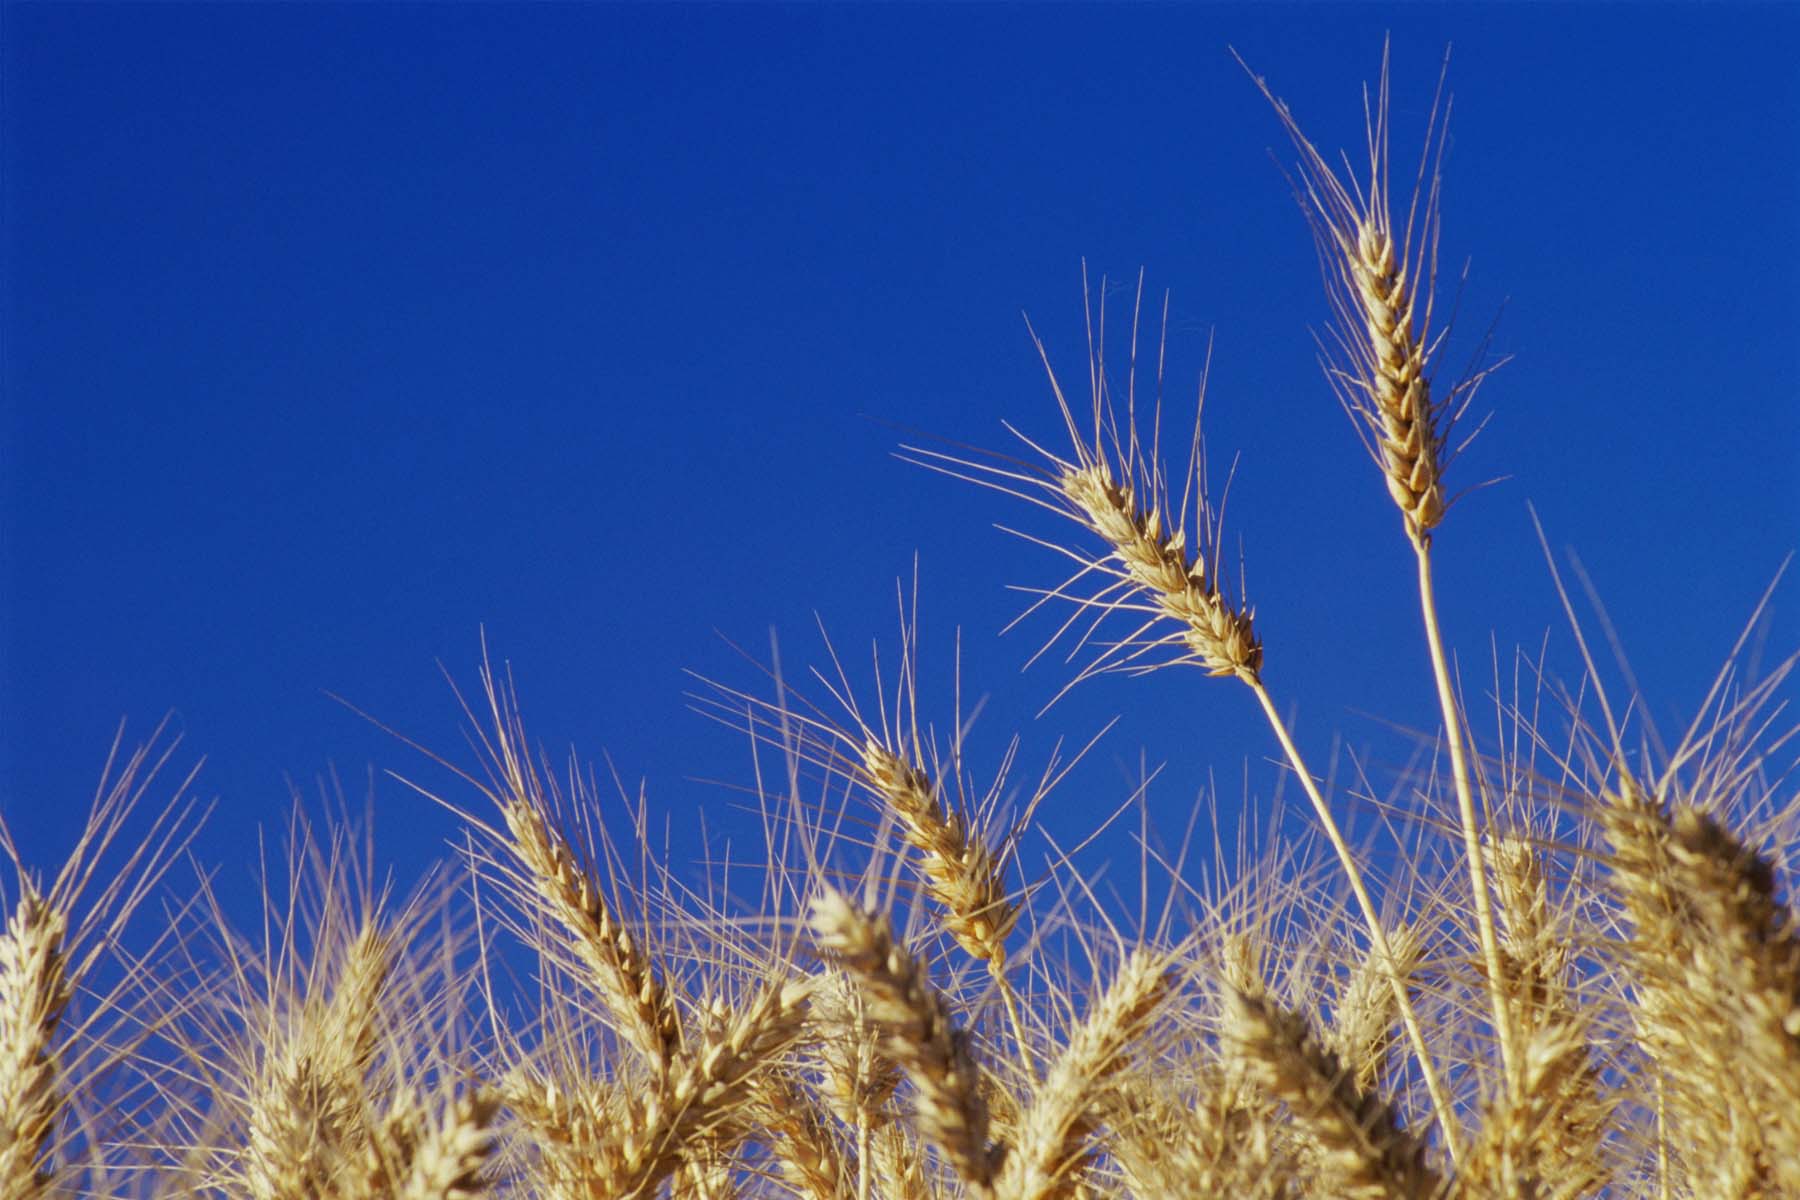 Is American wheat different than European wheat? | HowStuffWorks